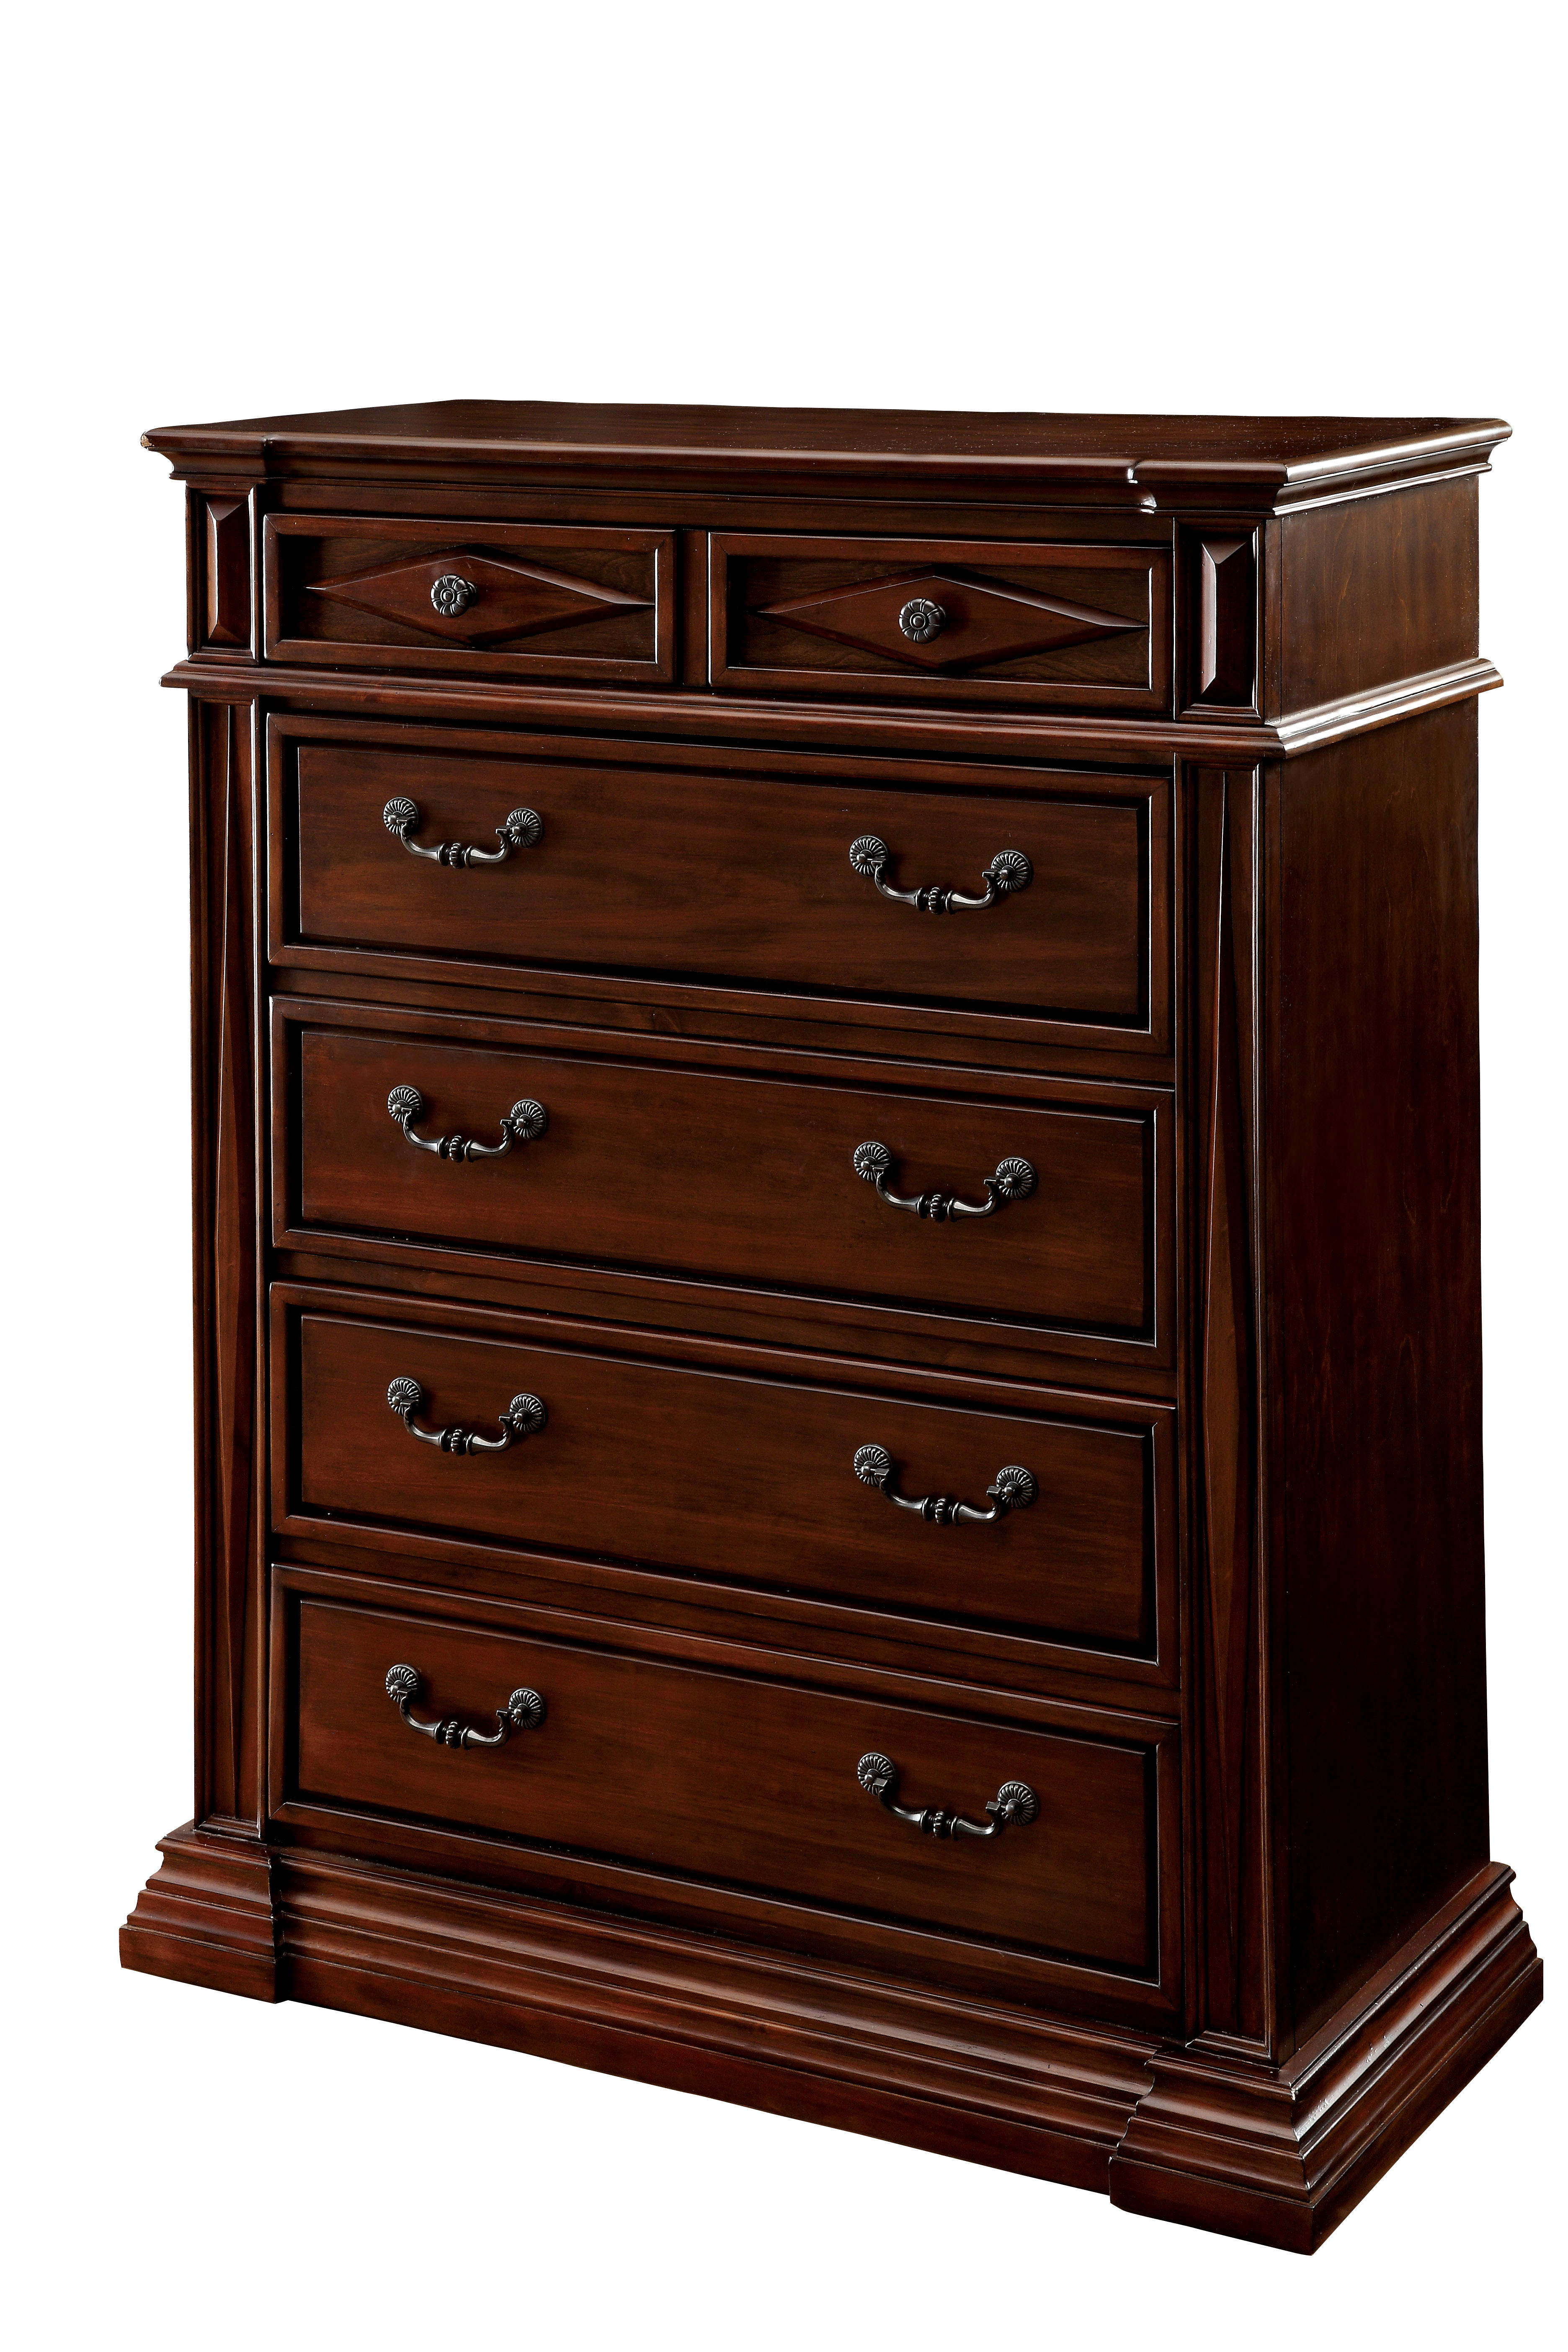 Furniture of America Ardel Cherry Finish Diamond Carved 6-Drawer Chest